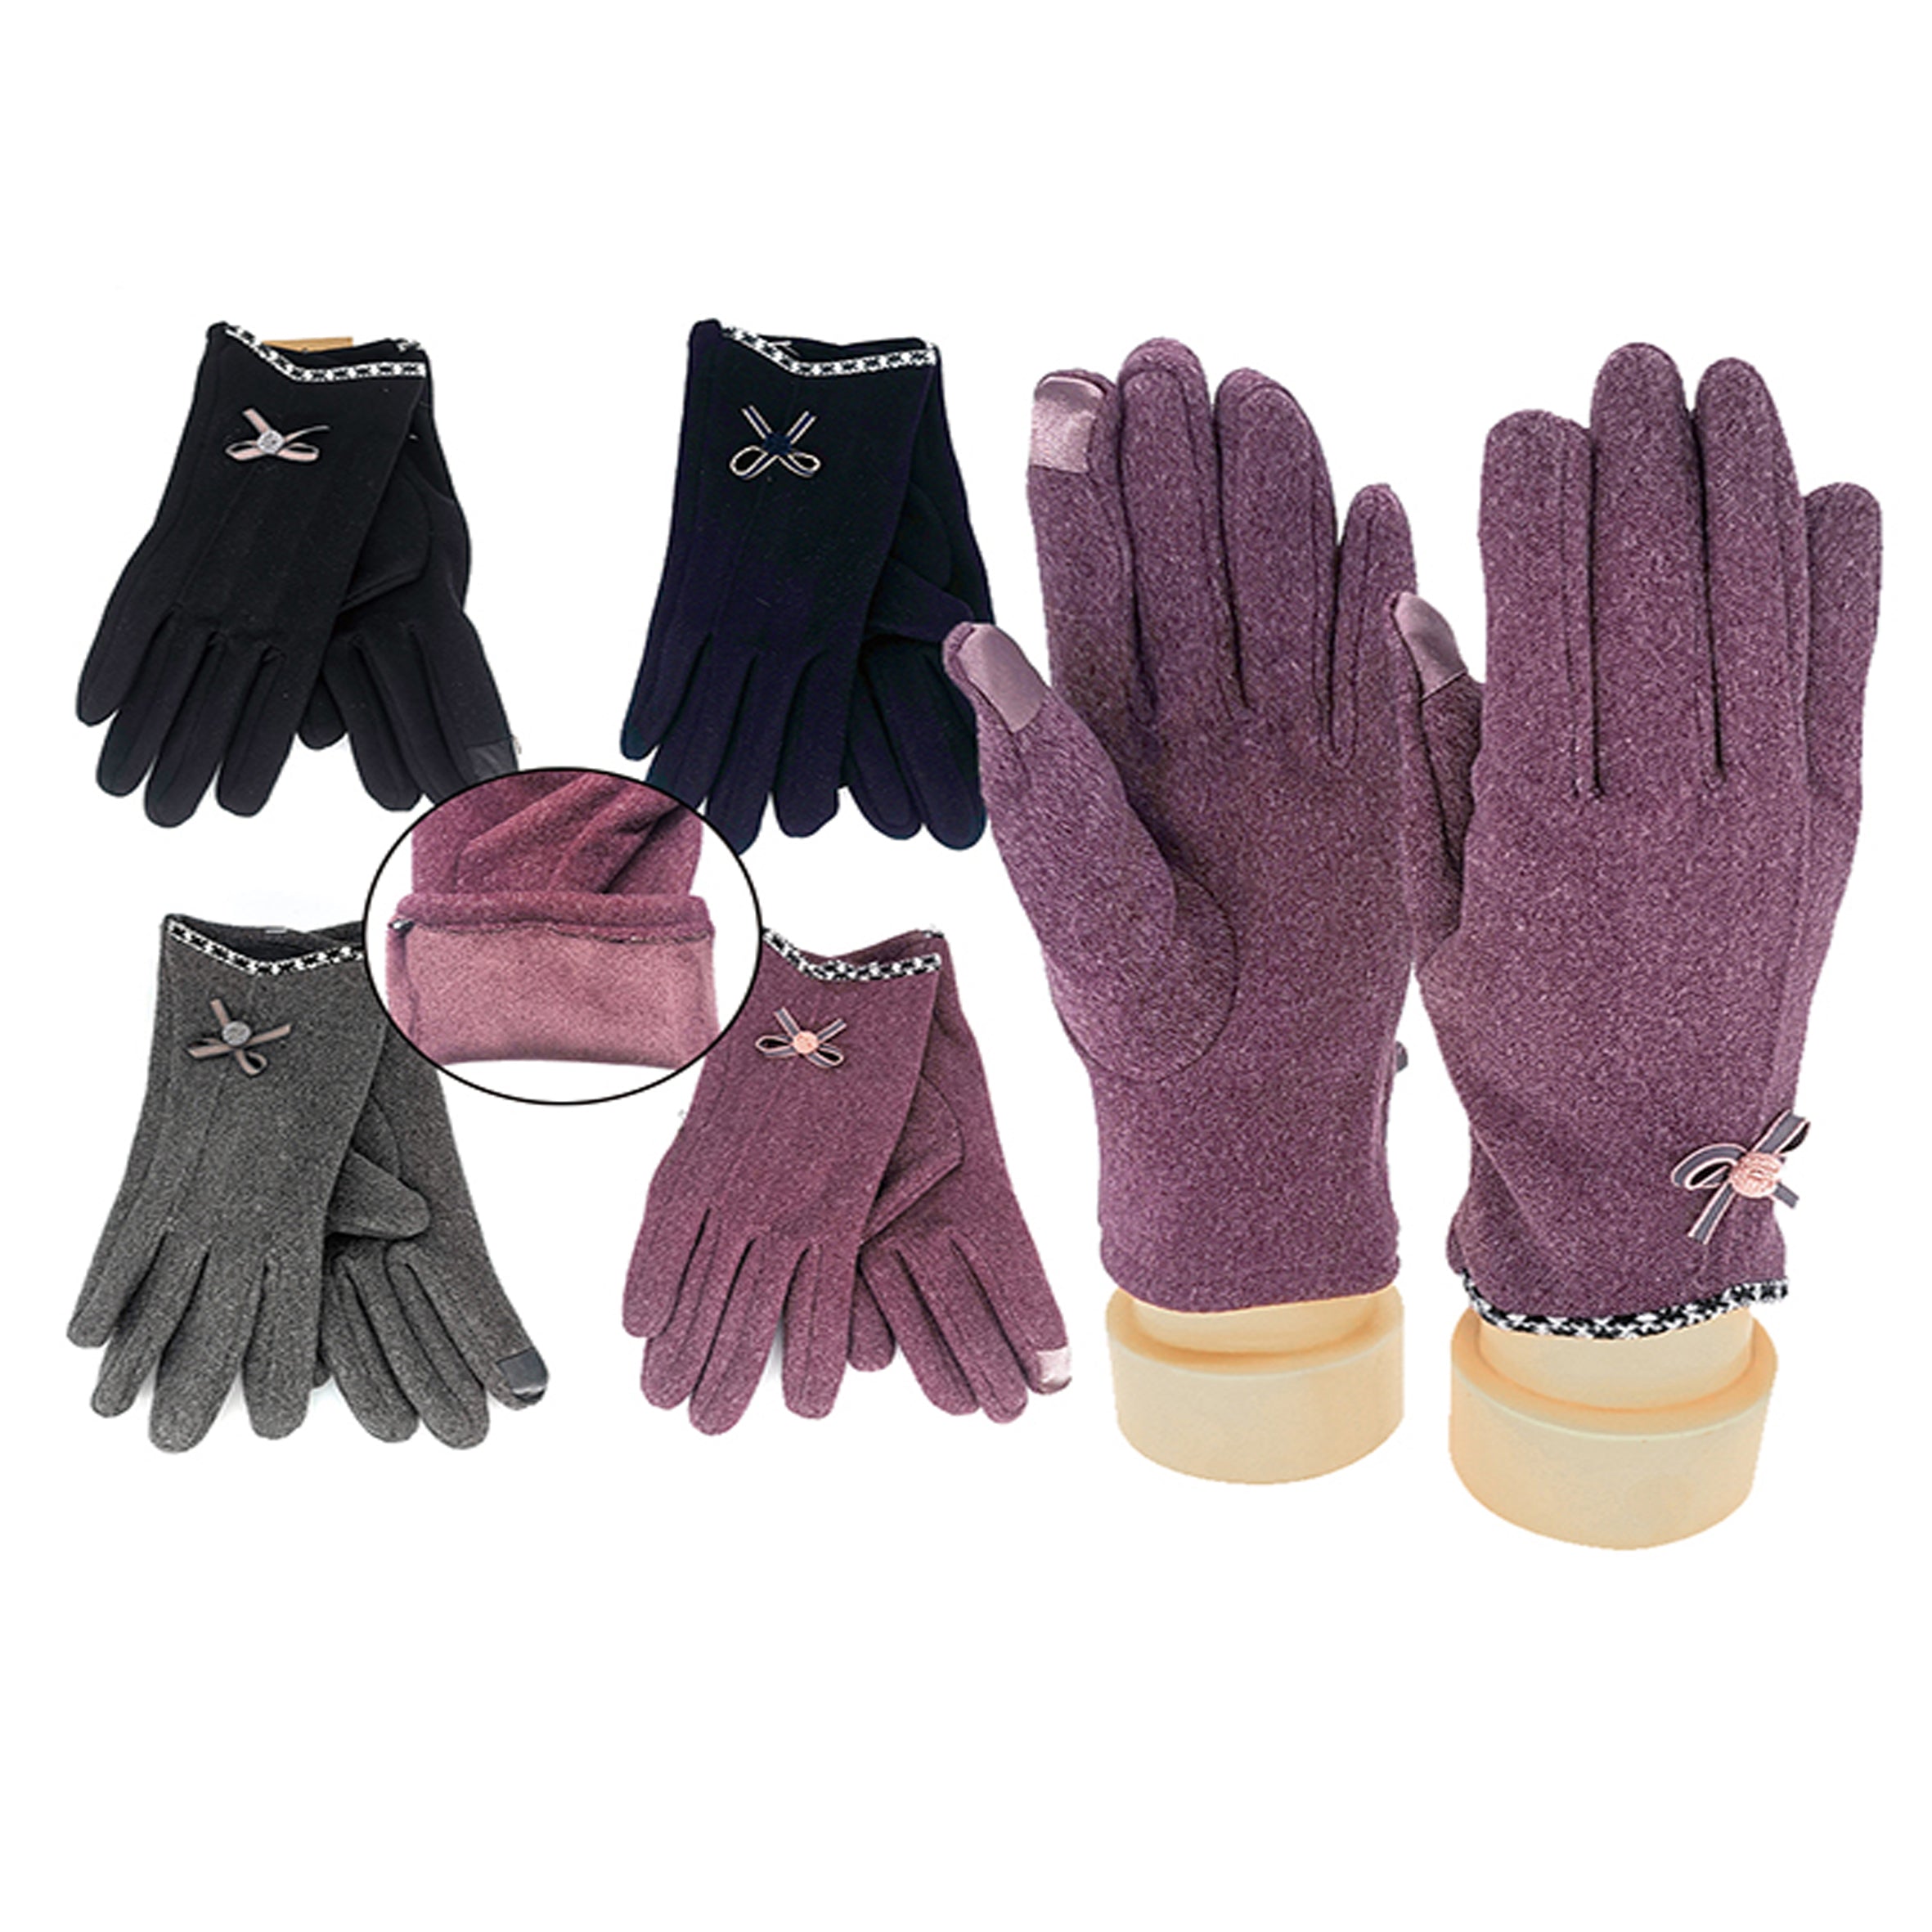 Wholesale CLOTHING Accessories Women's Glove Bowknot Gloves NH294